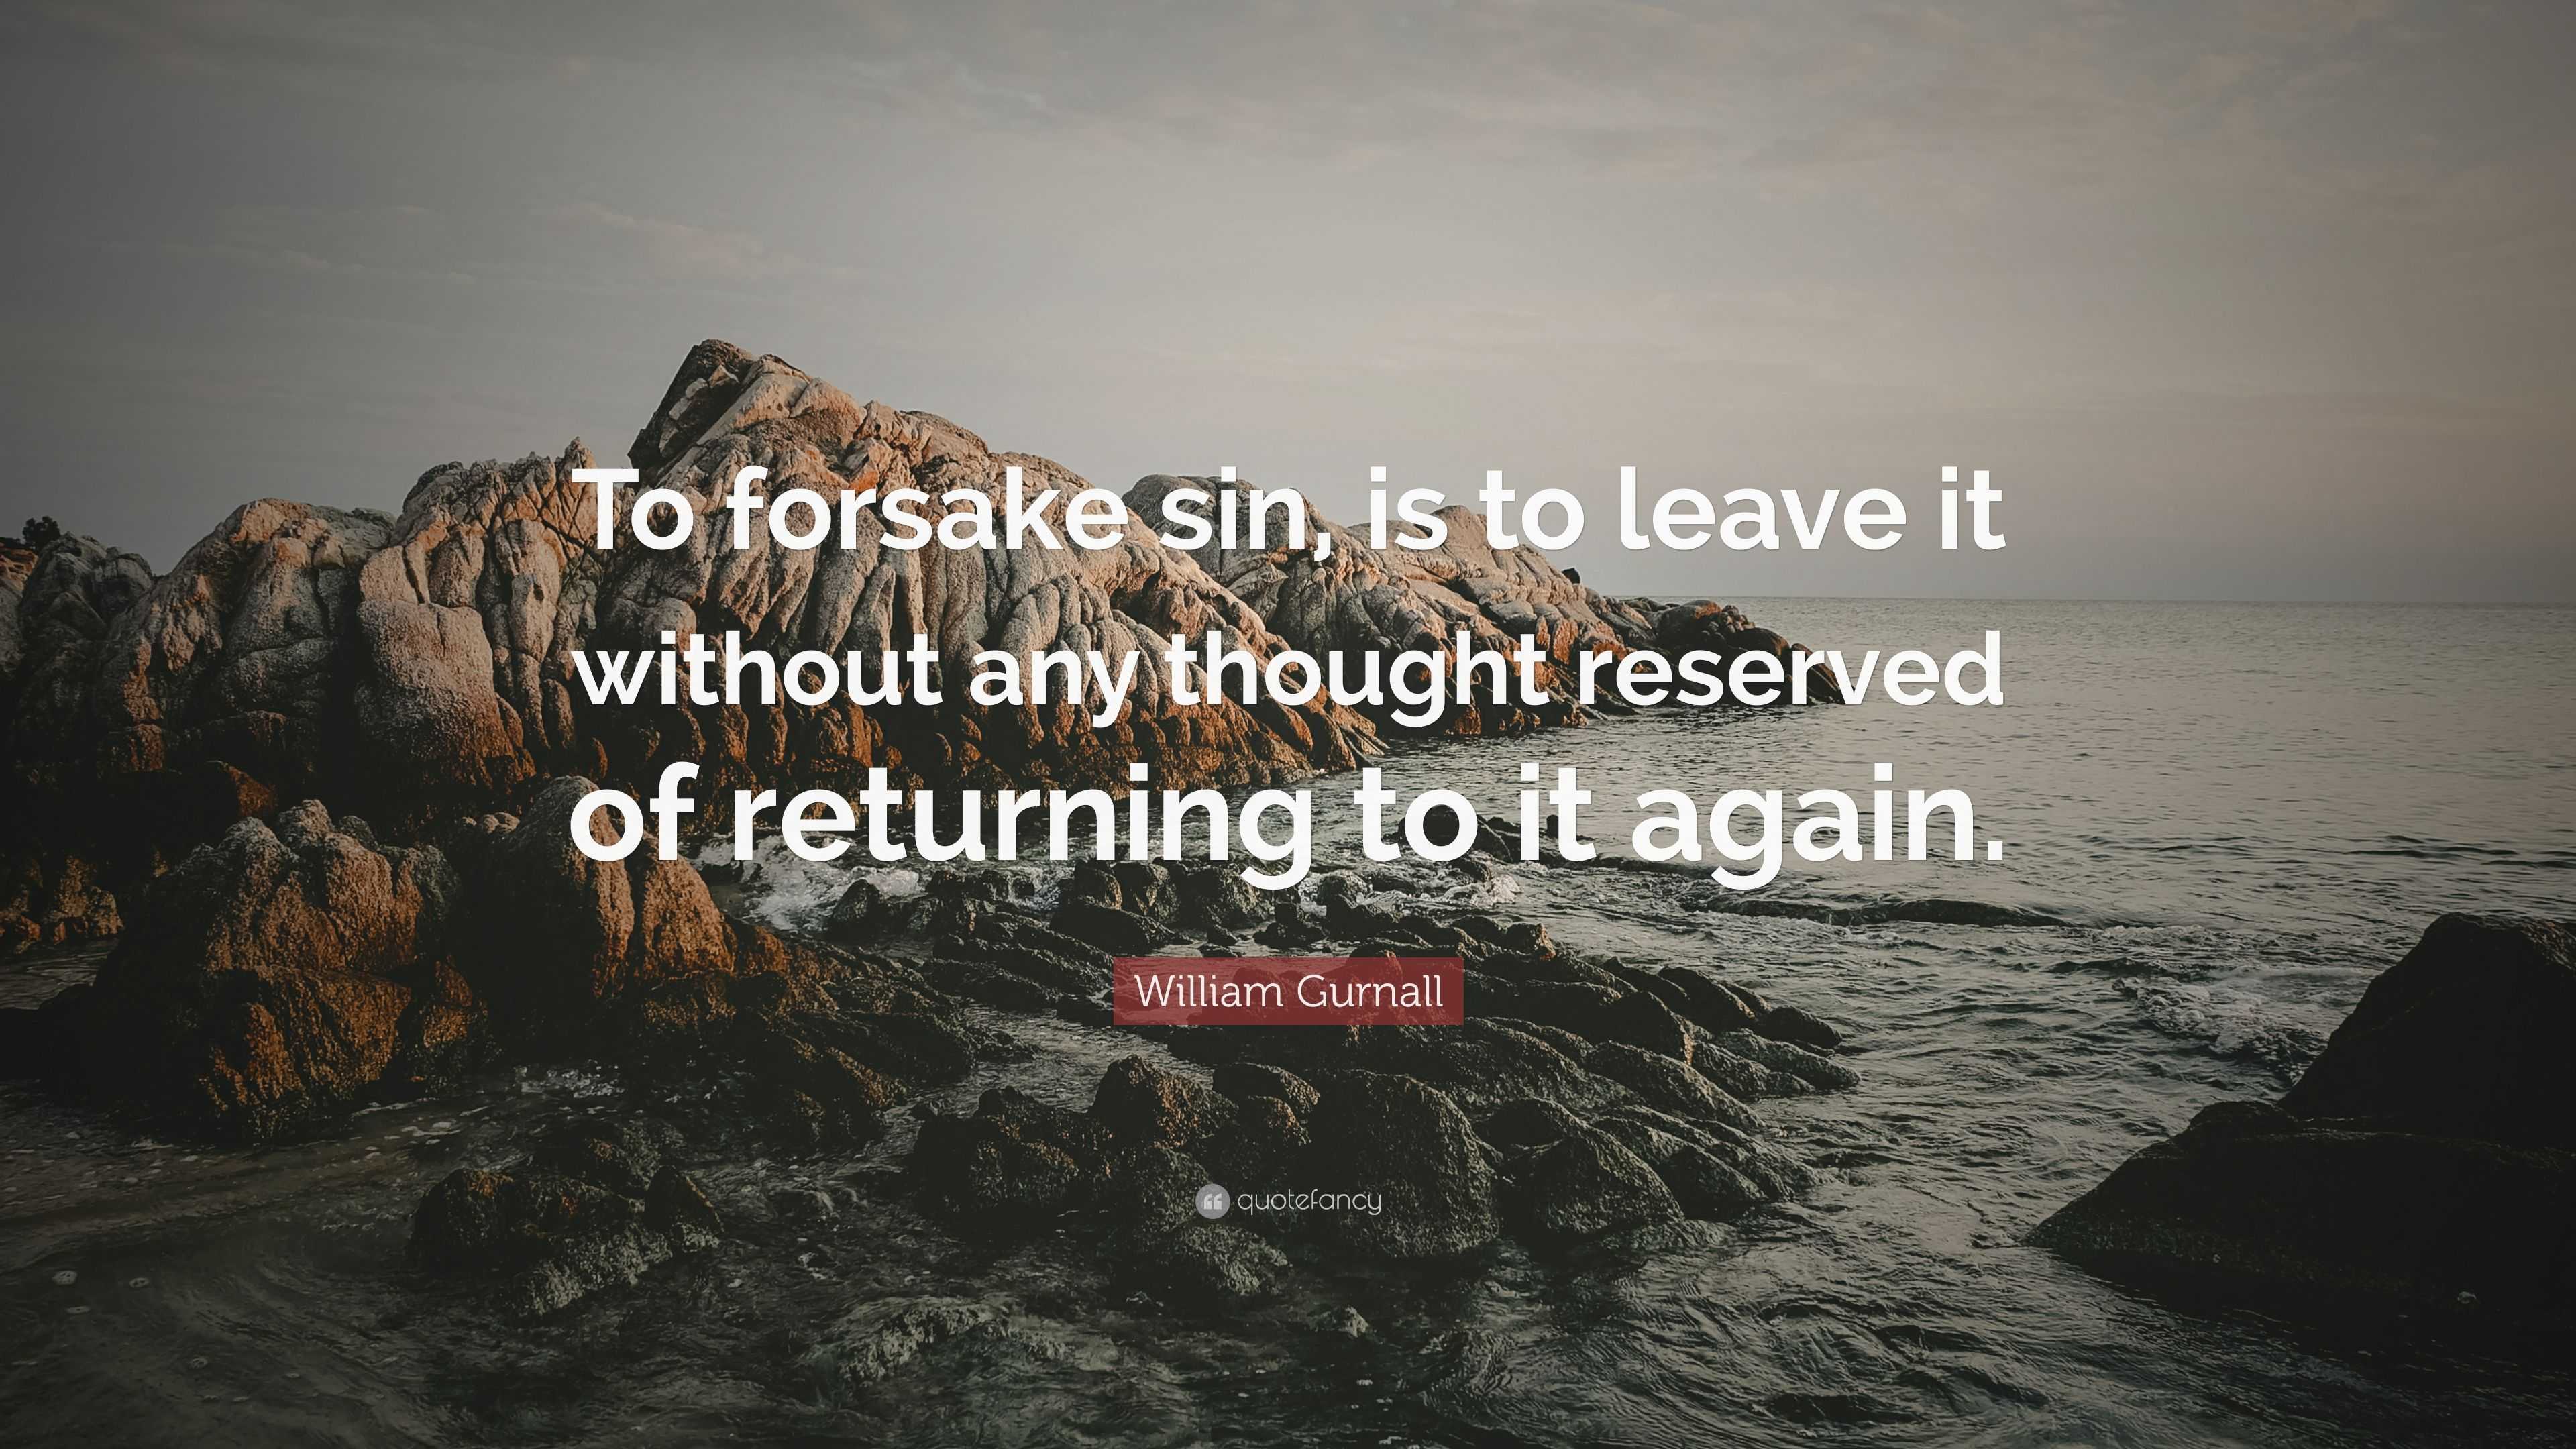 William Gurnall Quote: “To forsake sin, is to leave it without any ...